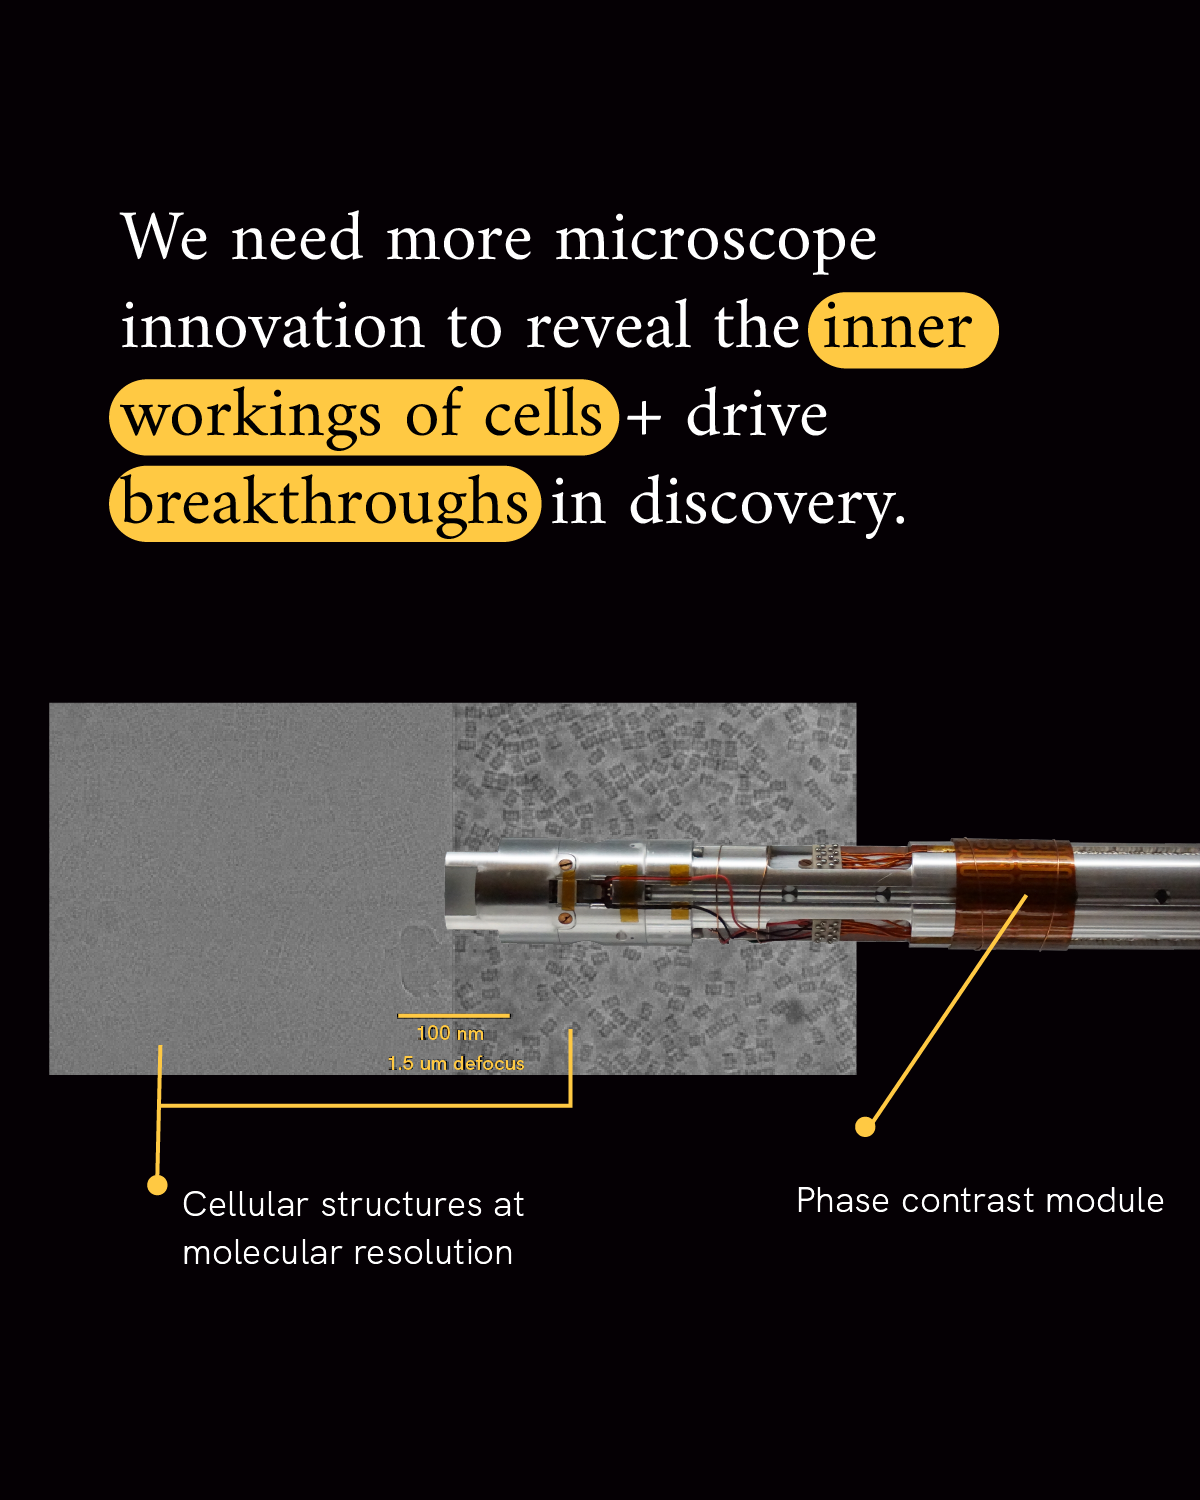 Infographic reads “We need more microscope innovation to reveal the inner workings of cells + drive breakthroughs in discovery.” A photo of a tube-shaped microscope on top of a gray rectangle of cell samples in two levels of magnification accompany the text.